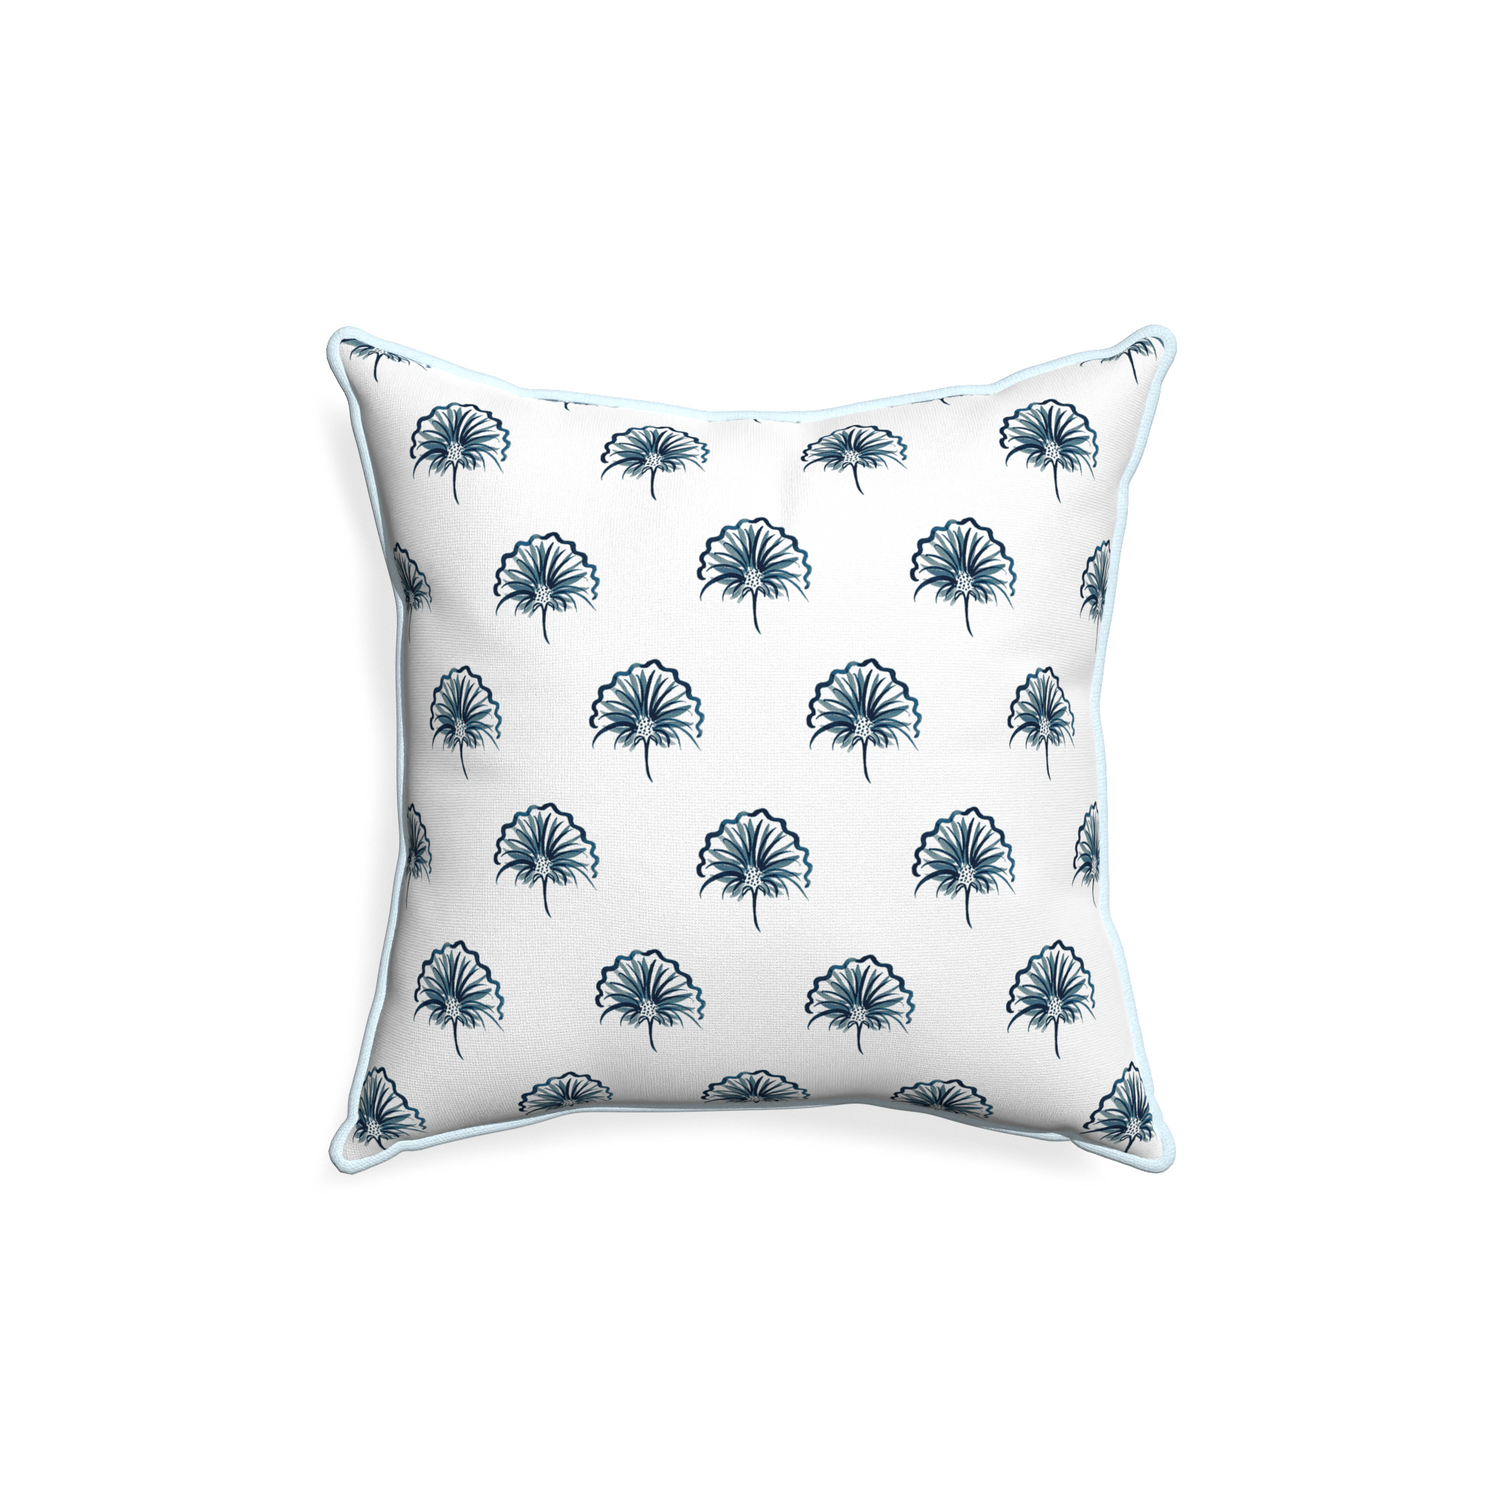 18-square penelope midnight custom pillow with powder piping on white background